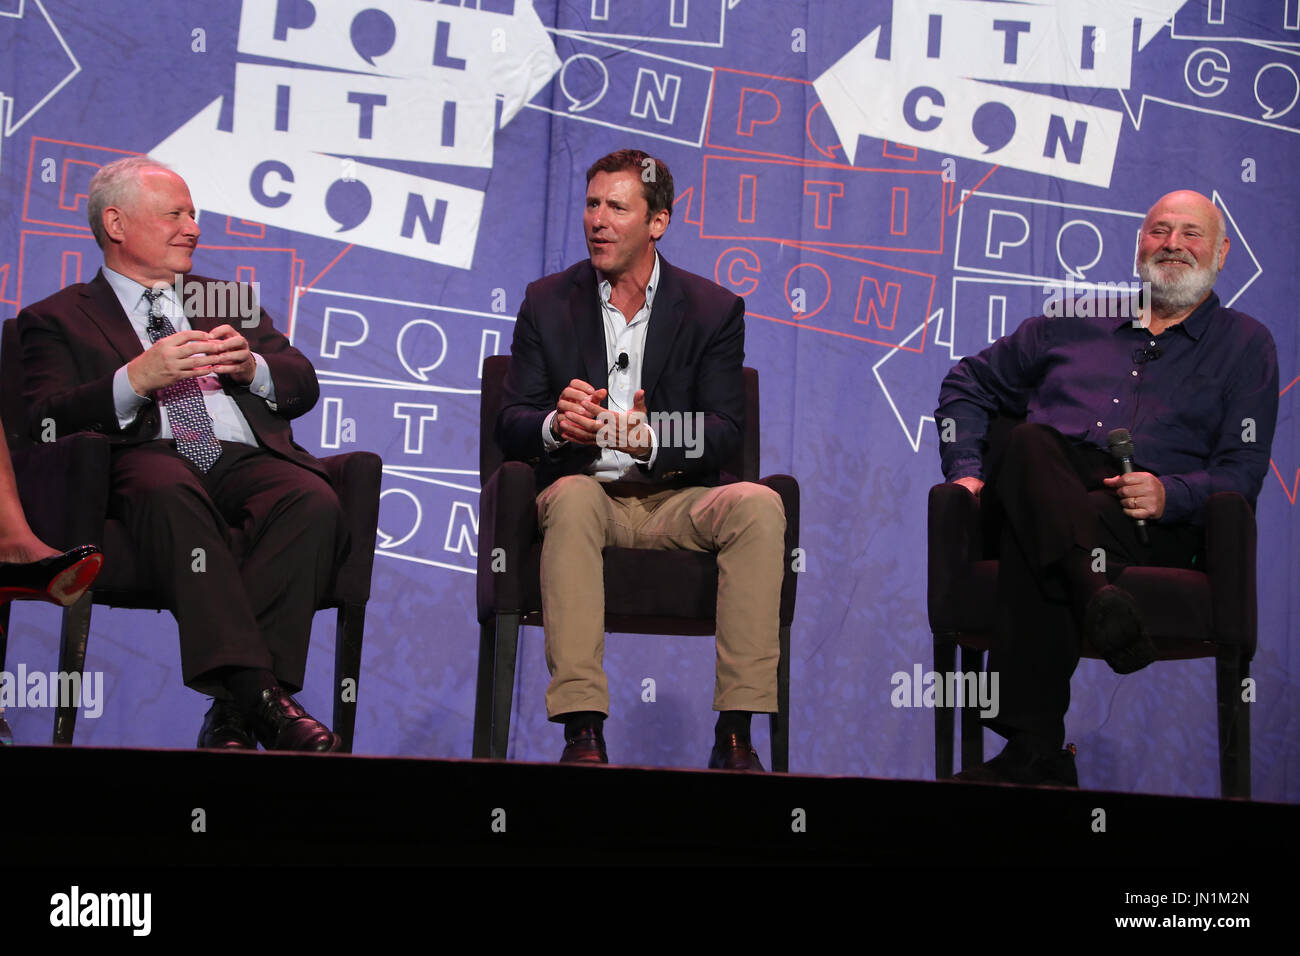 Pasadena, Ca. 29th July, 2017. Bill Kristol, Mark Updegrove and Rob Reiner pictured during the LBJ Panel Discussion at day 1 of Politicon The Unconventional Convention 2017 at The Pasadena Convention Center in Pasadena, California on July 29, 2017. Credit: Faye Sadou/Media Punch/Alamy Live News Stock Photo